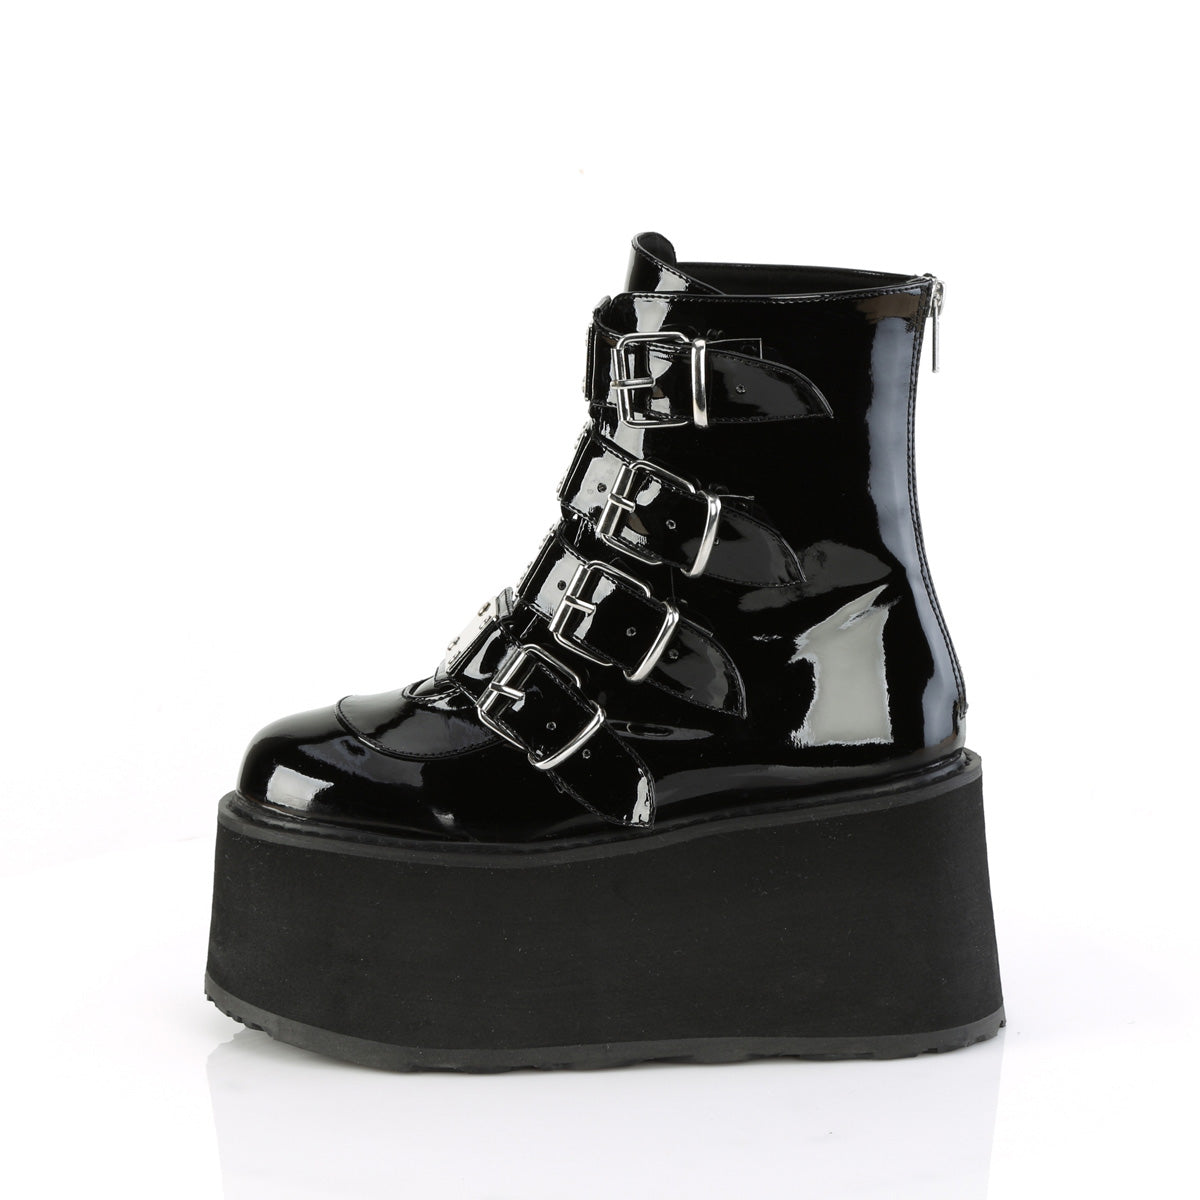 DAMNED-105 Black Ankle Boots